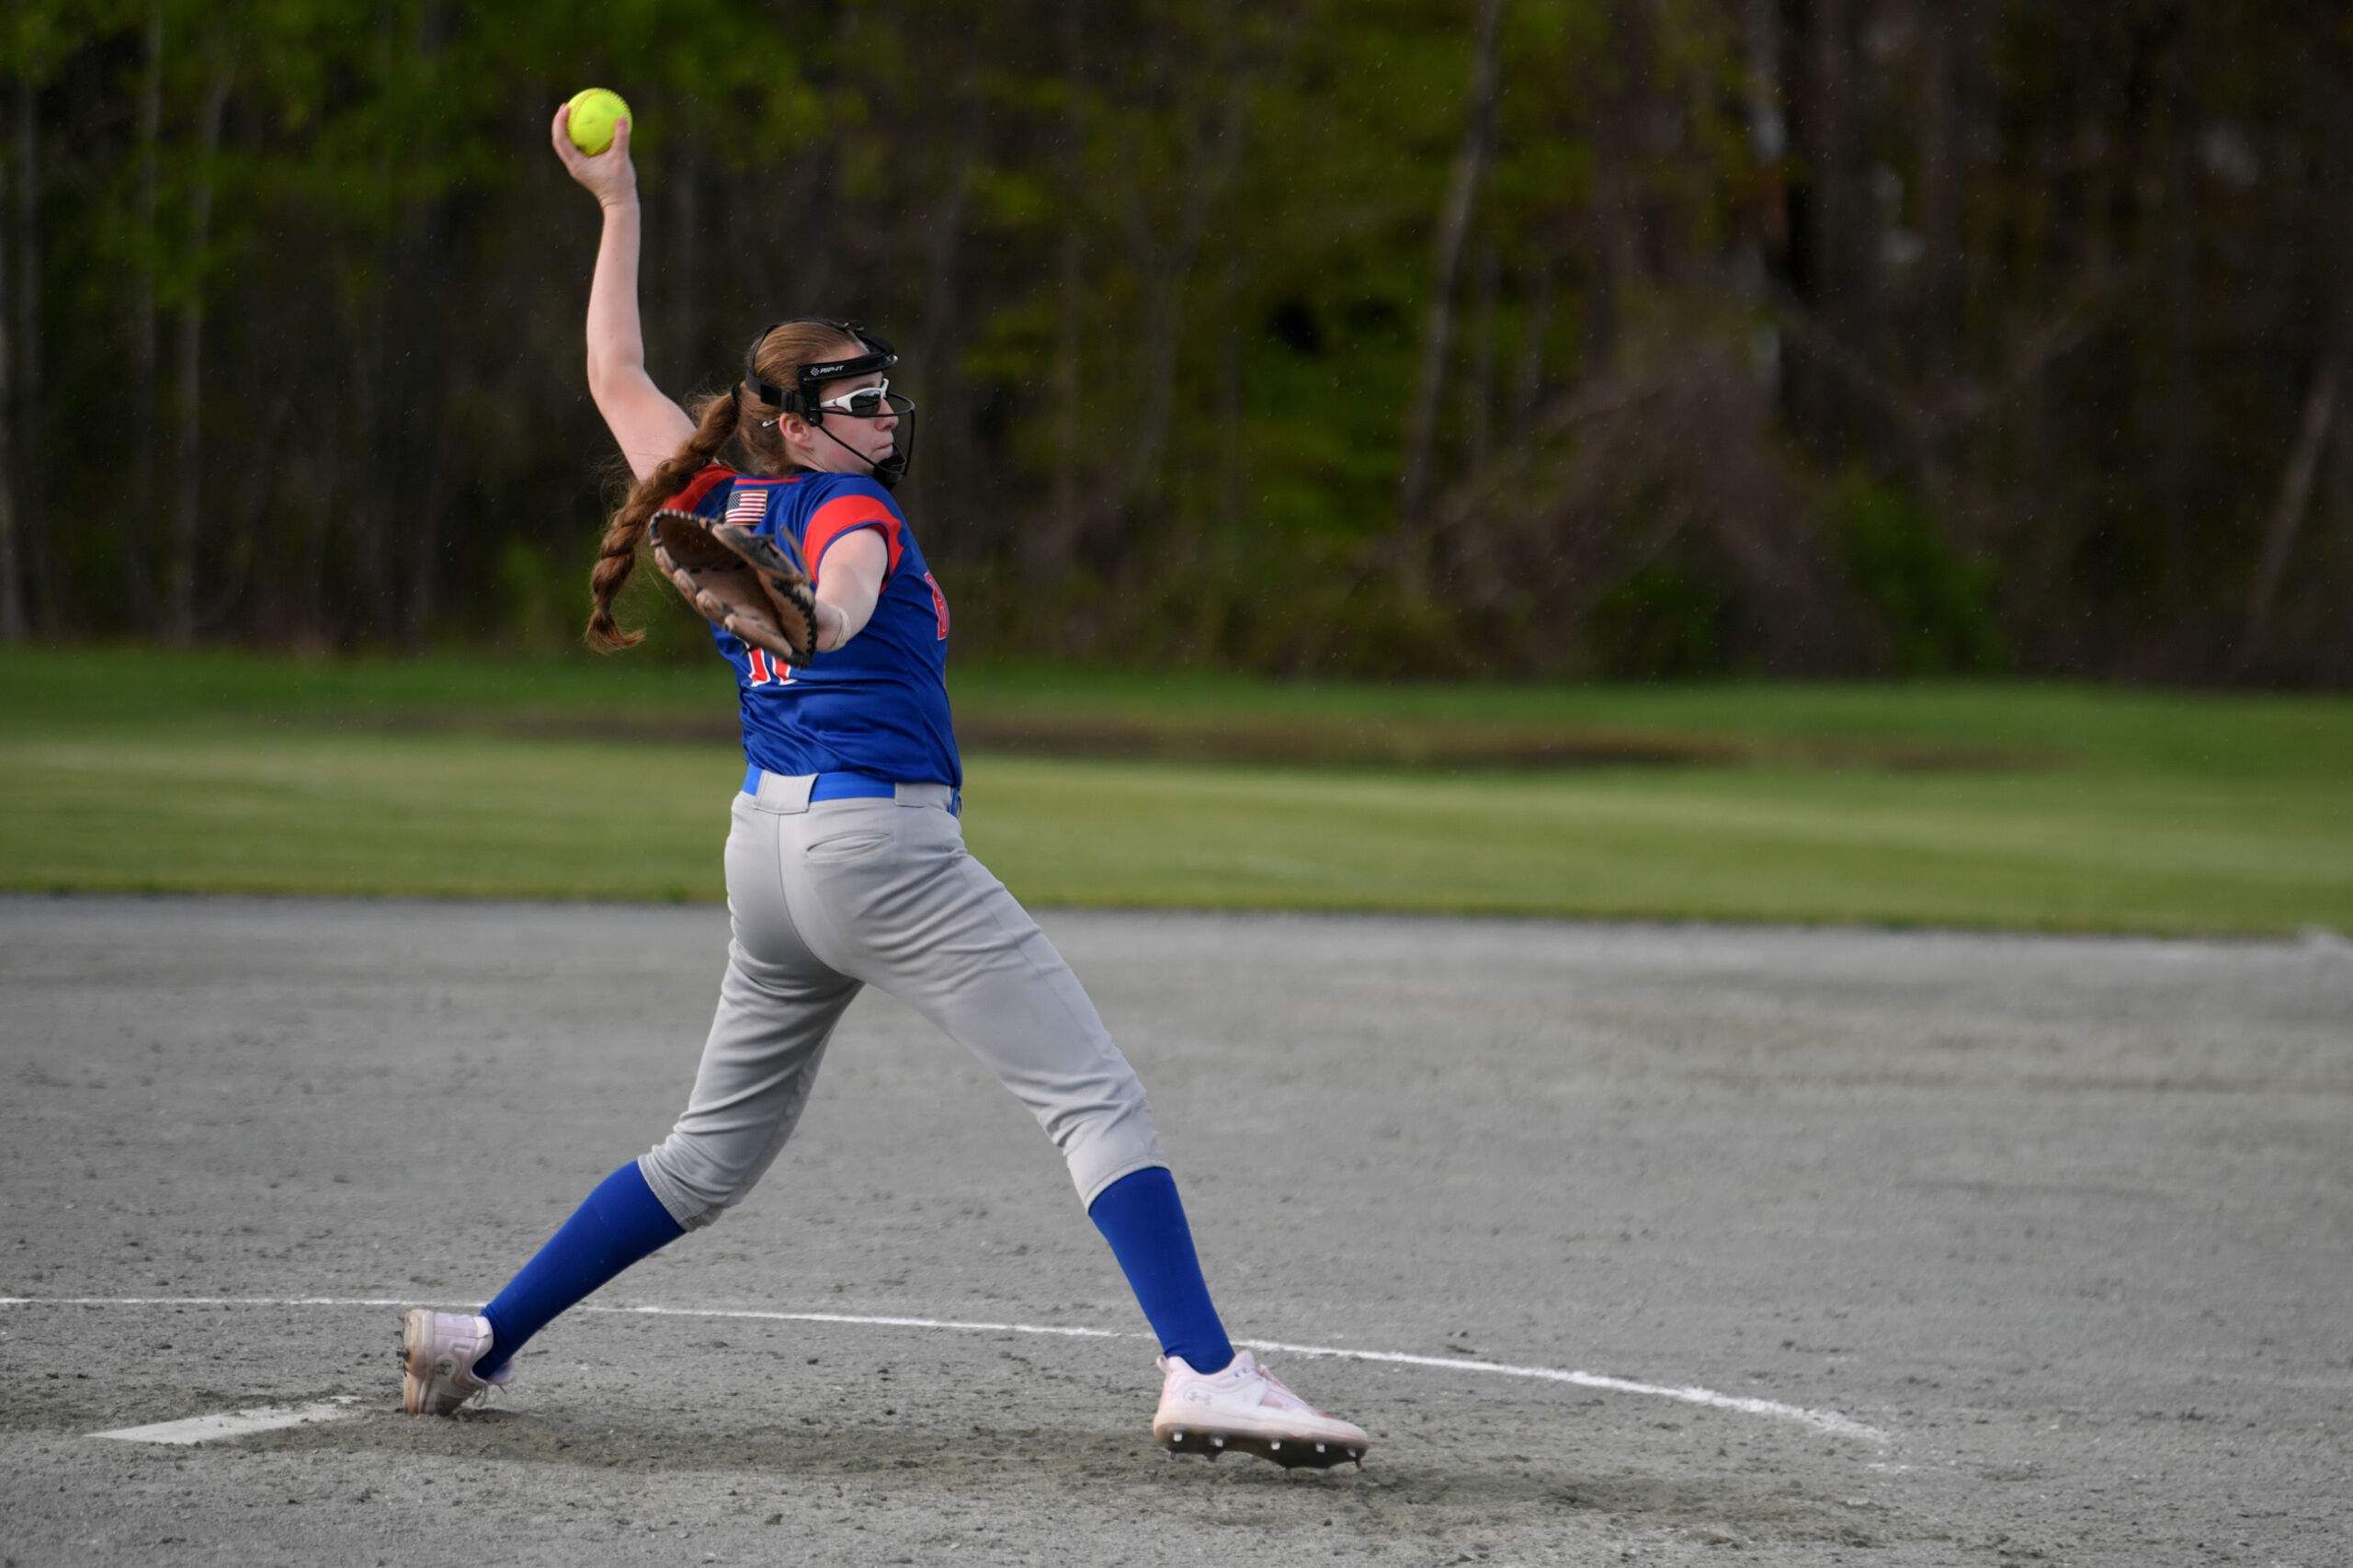 South High relief pitcher Jess Beames (11) winds up to deliver a pitch